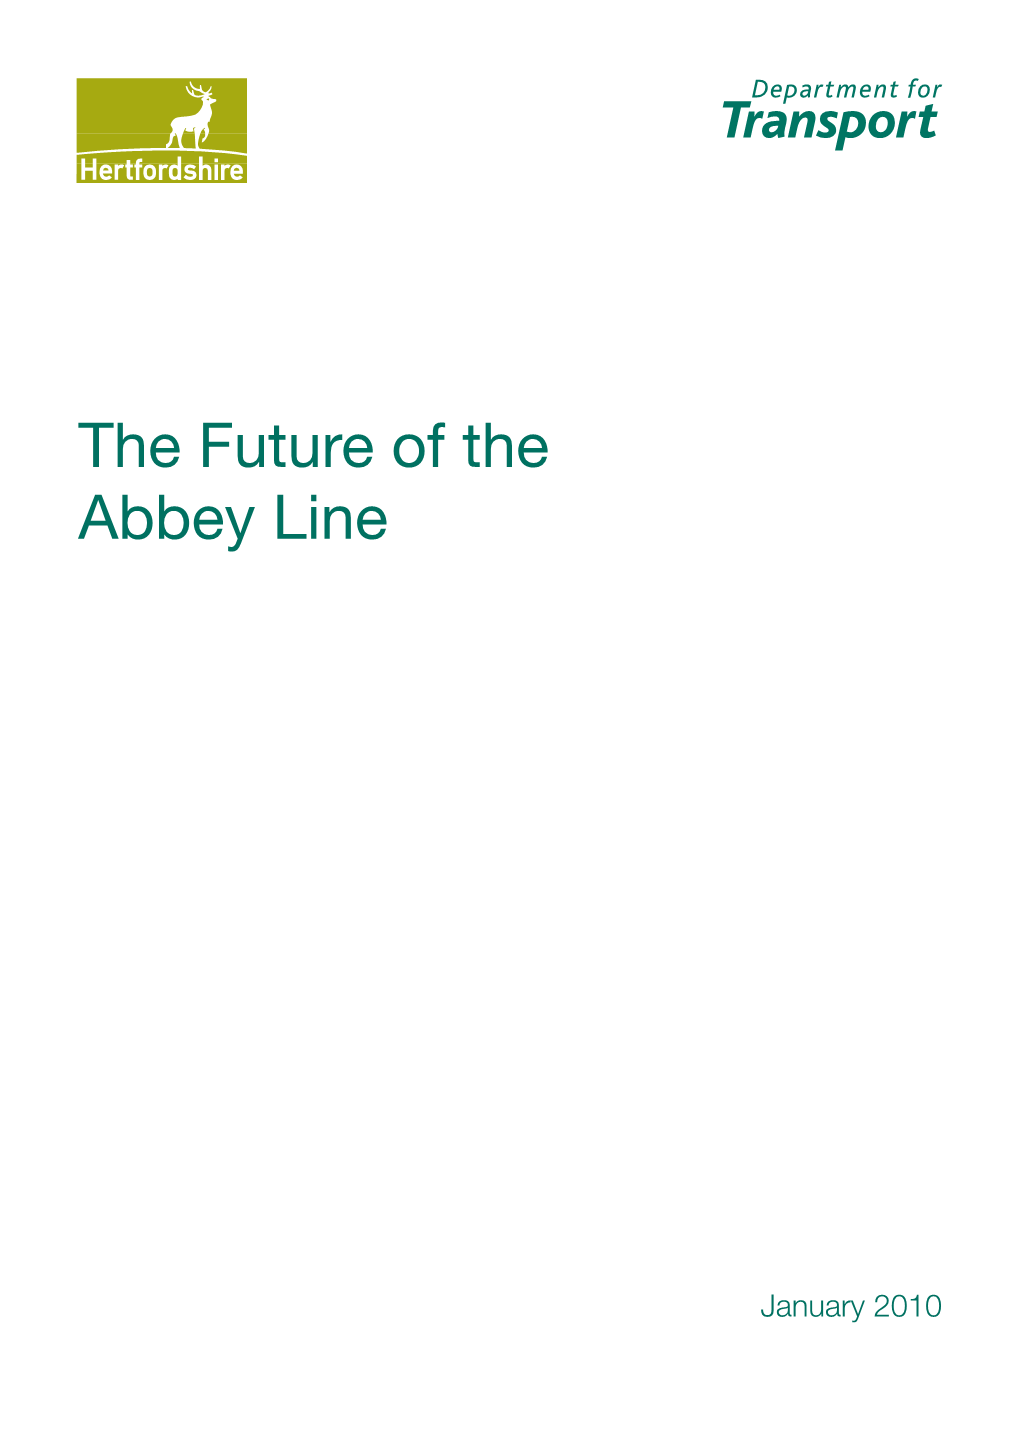 The Future of the Abbey Line